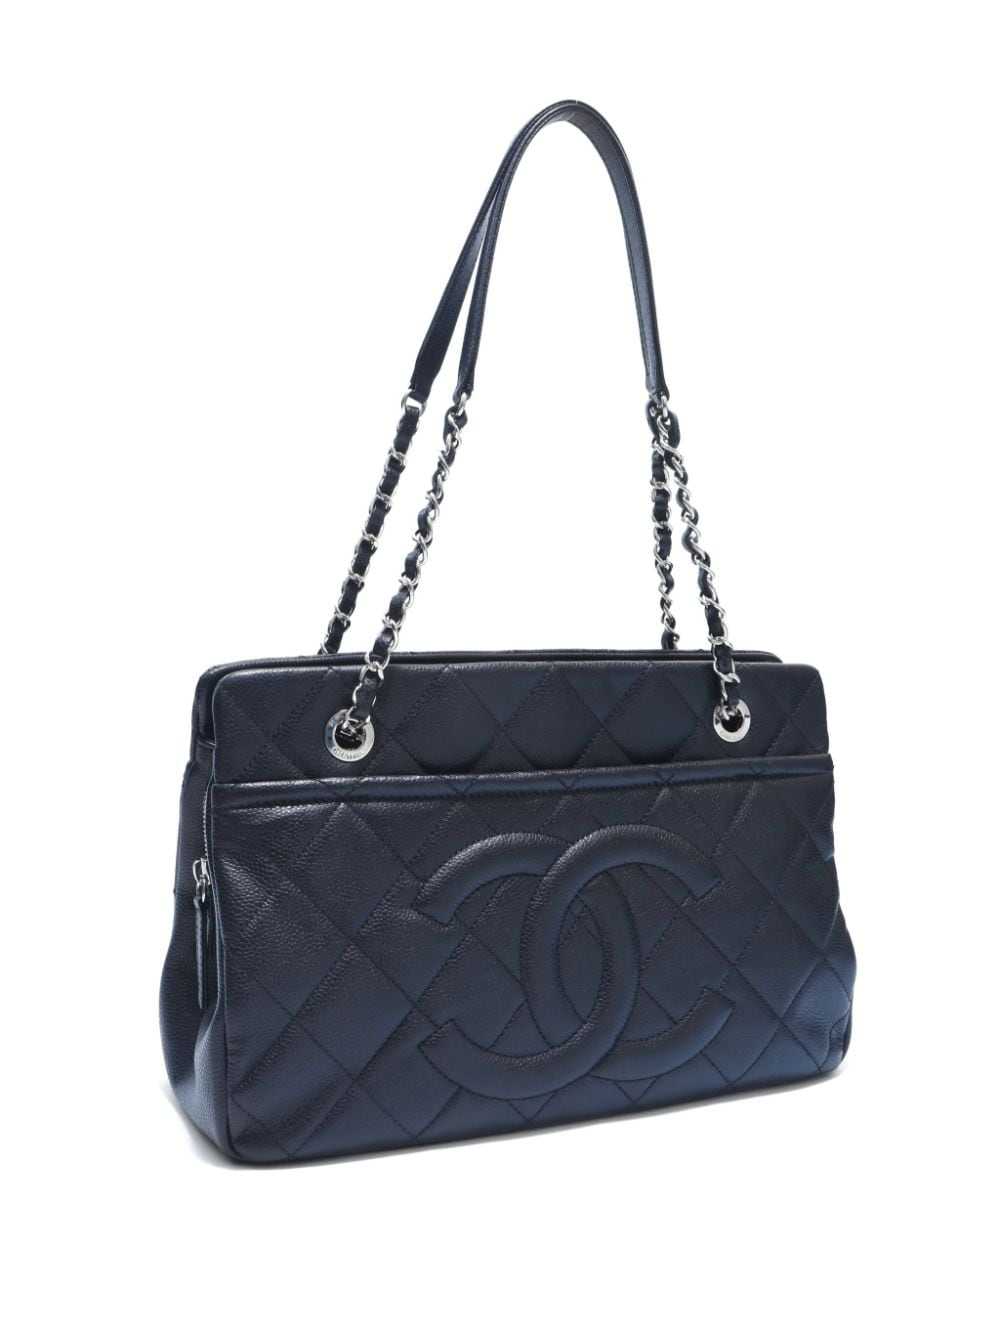 CHANEL Pre-Owned 2013 Timeless tote bag - Black - image 3